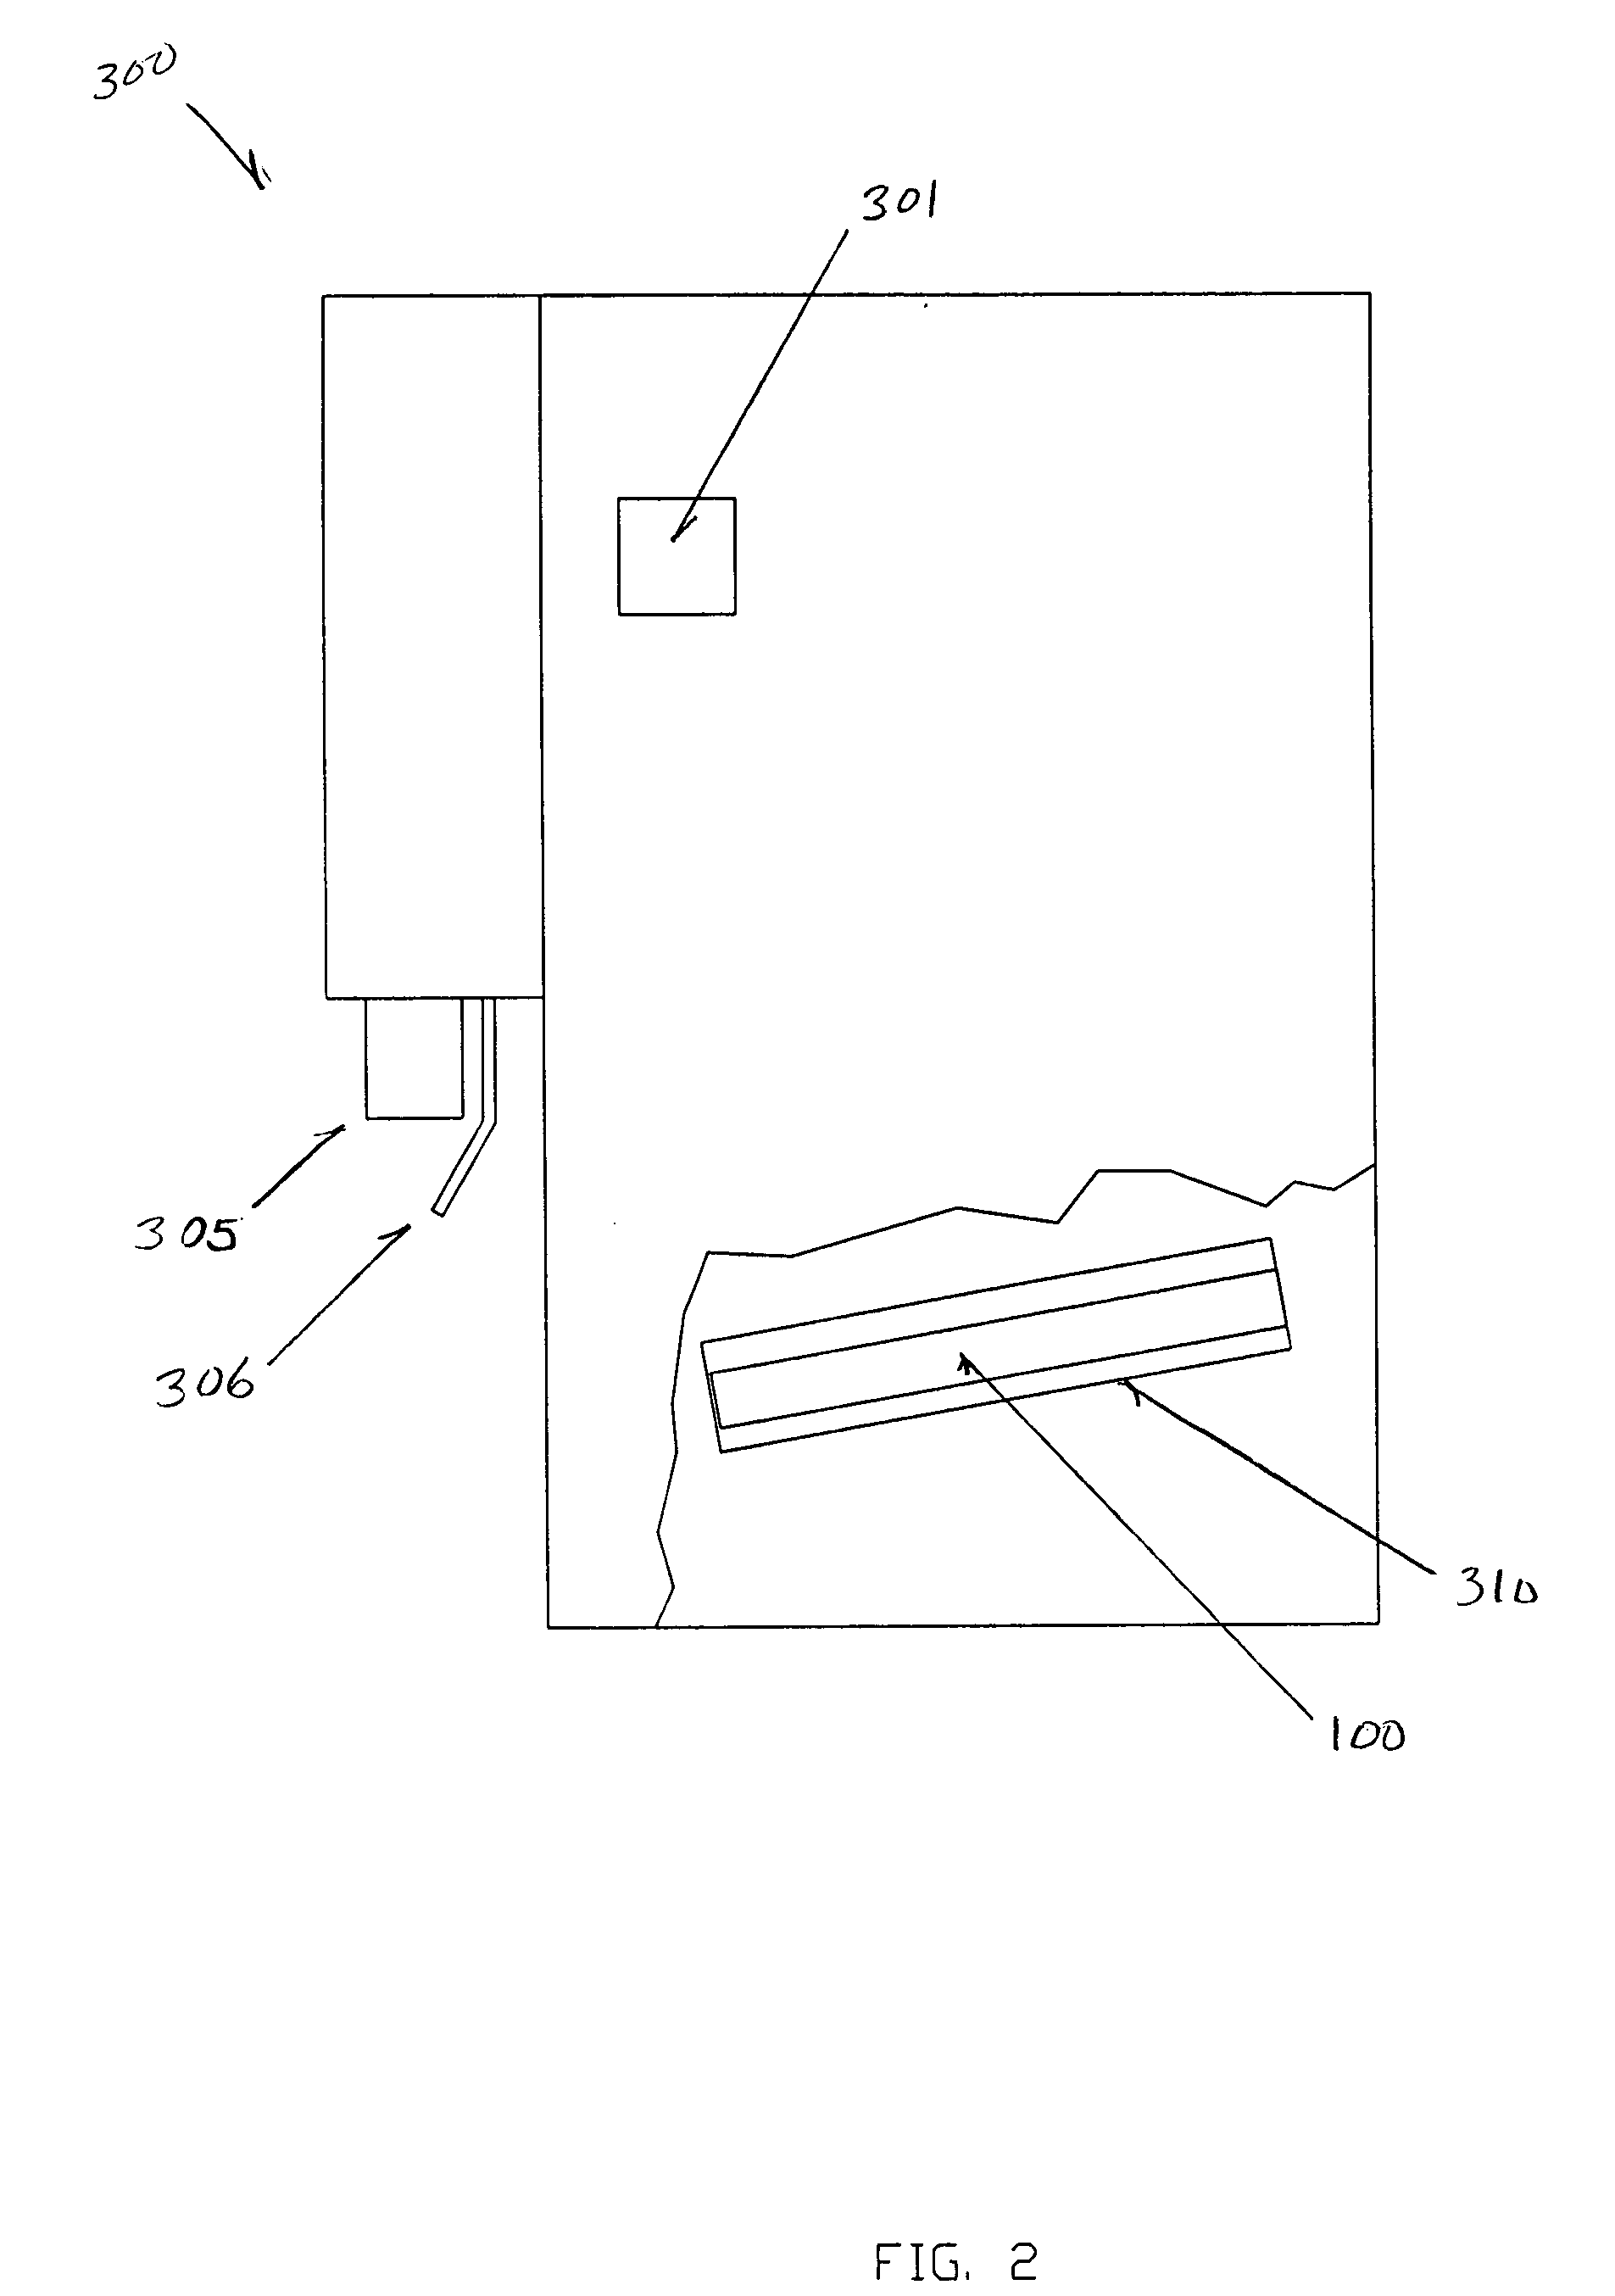 Method and apparatus for an oval carbonator